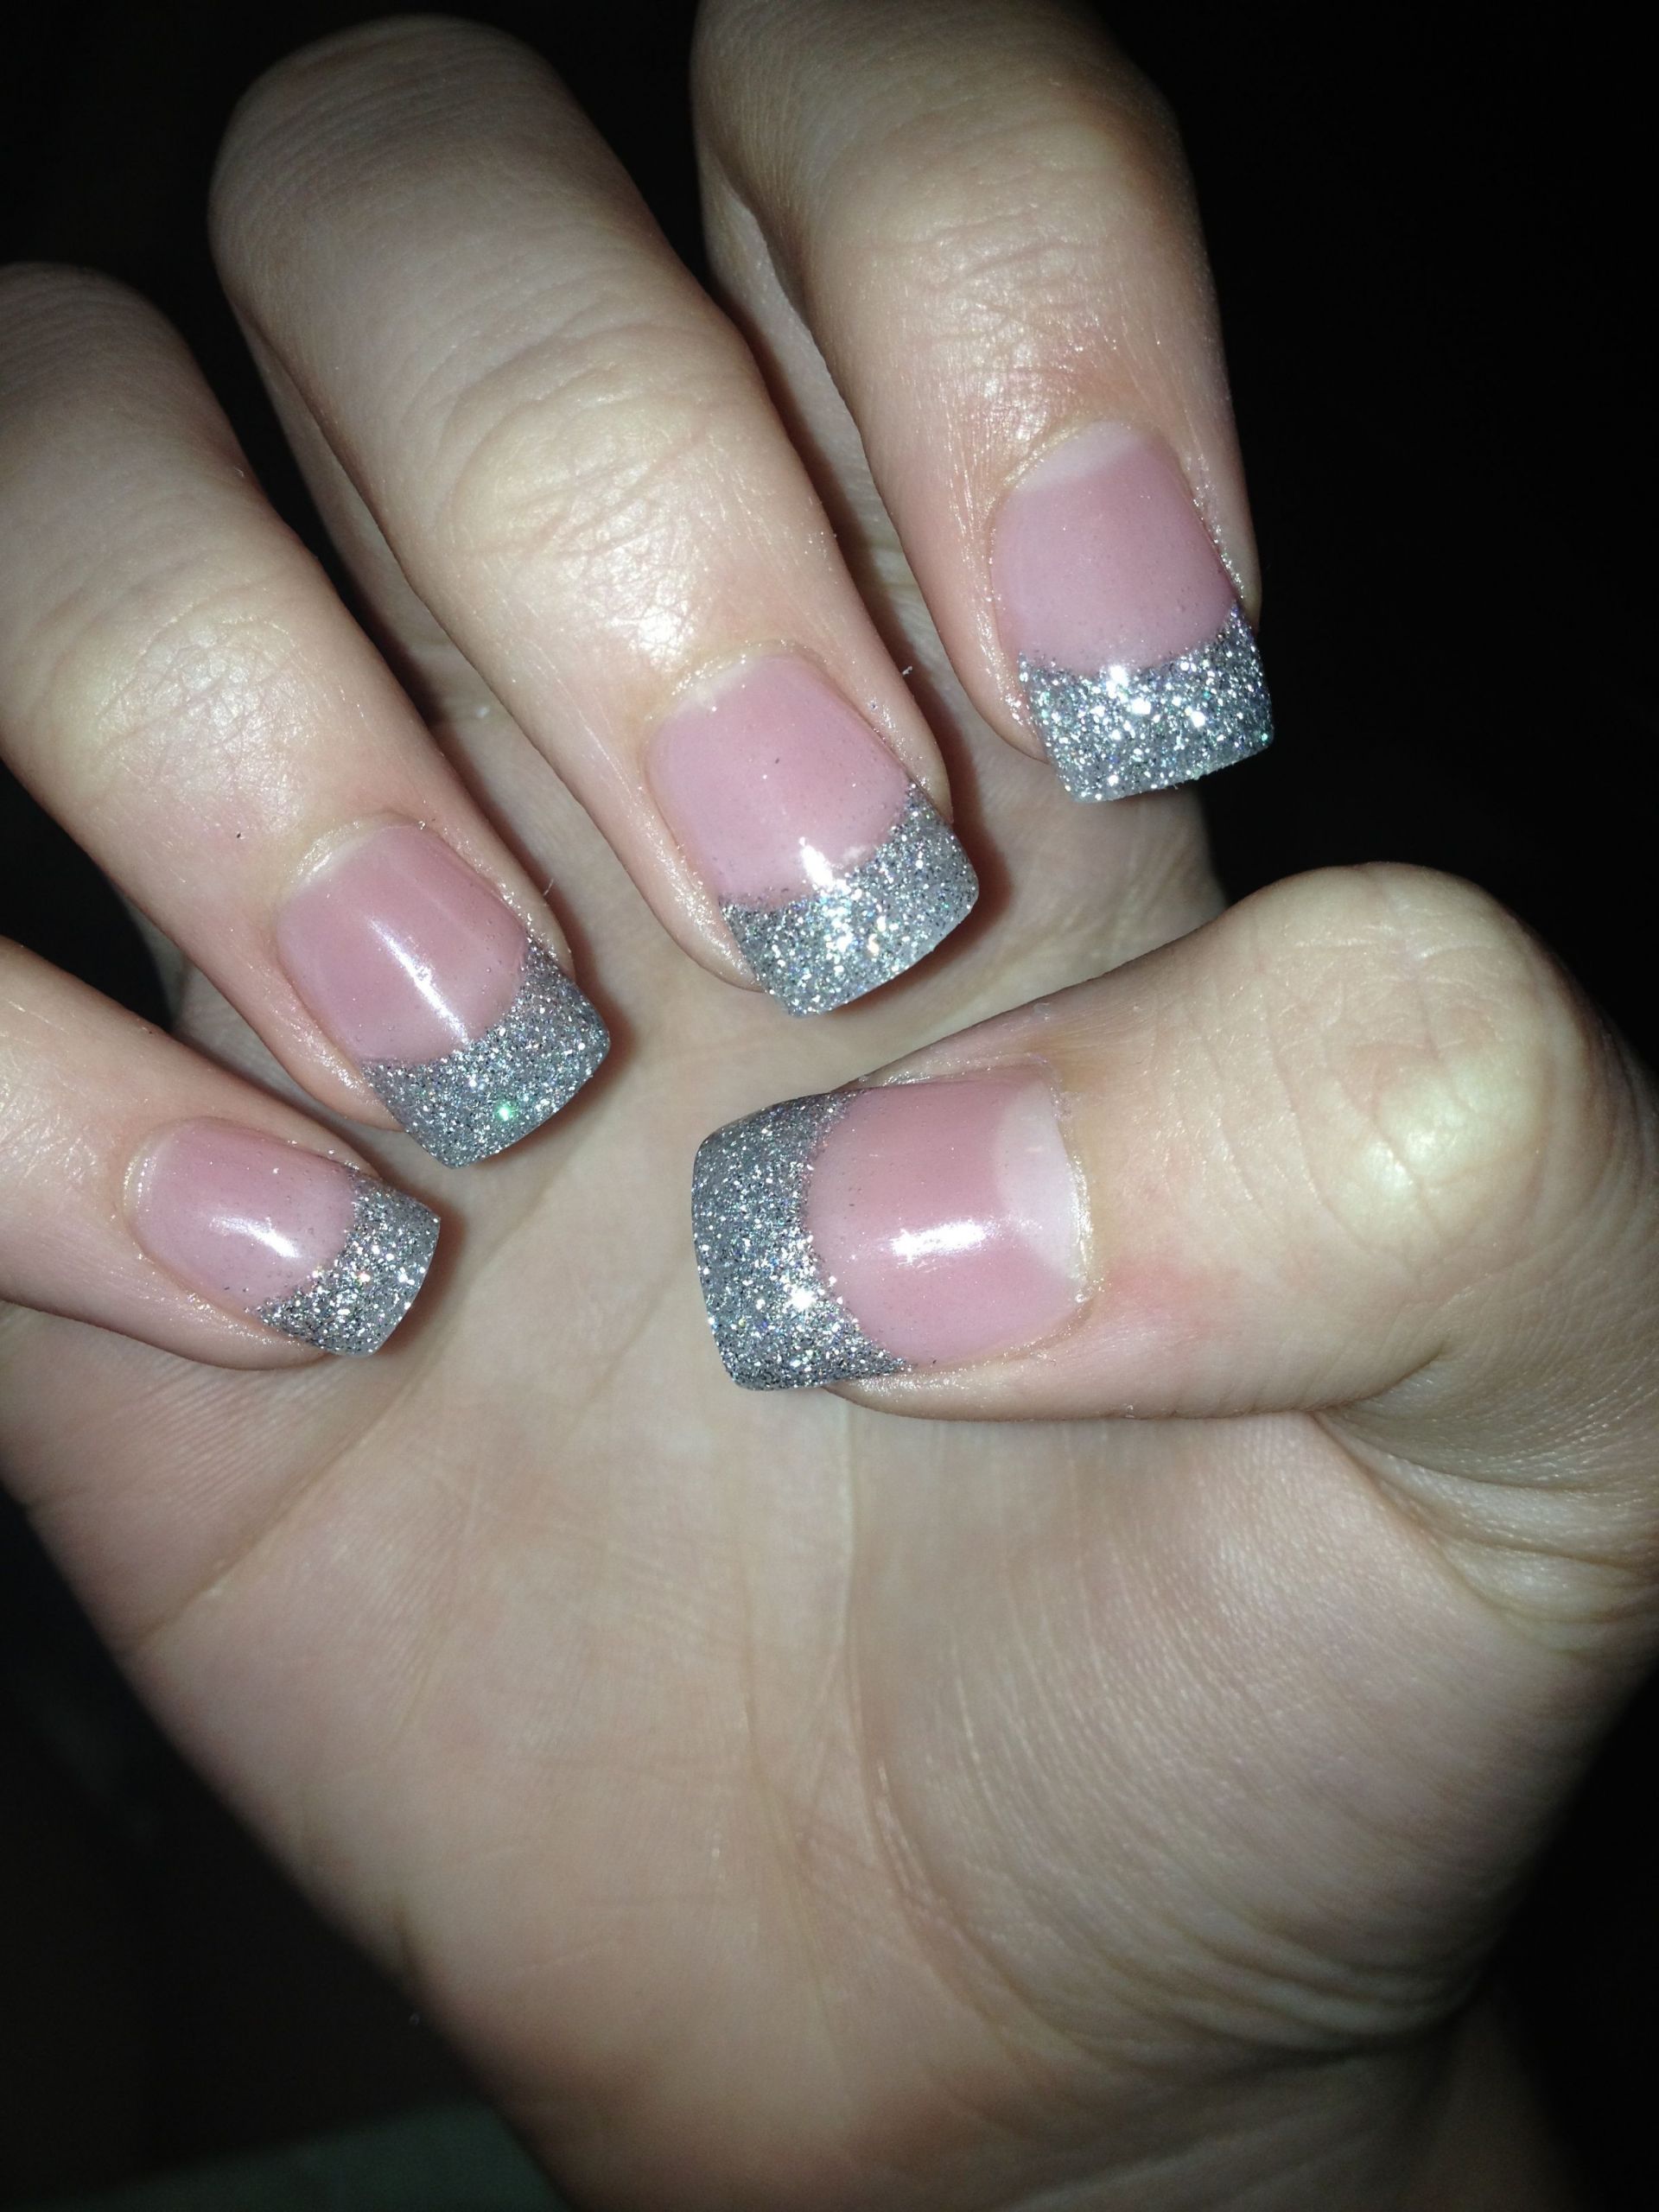 Silver Glitter Tips Nails
 Acrylic silver glitter french tips